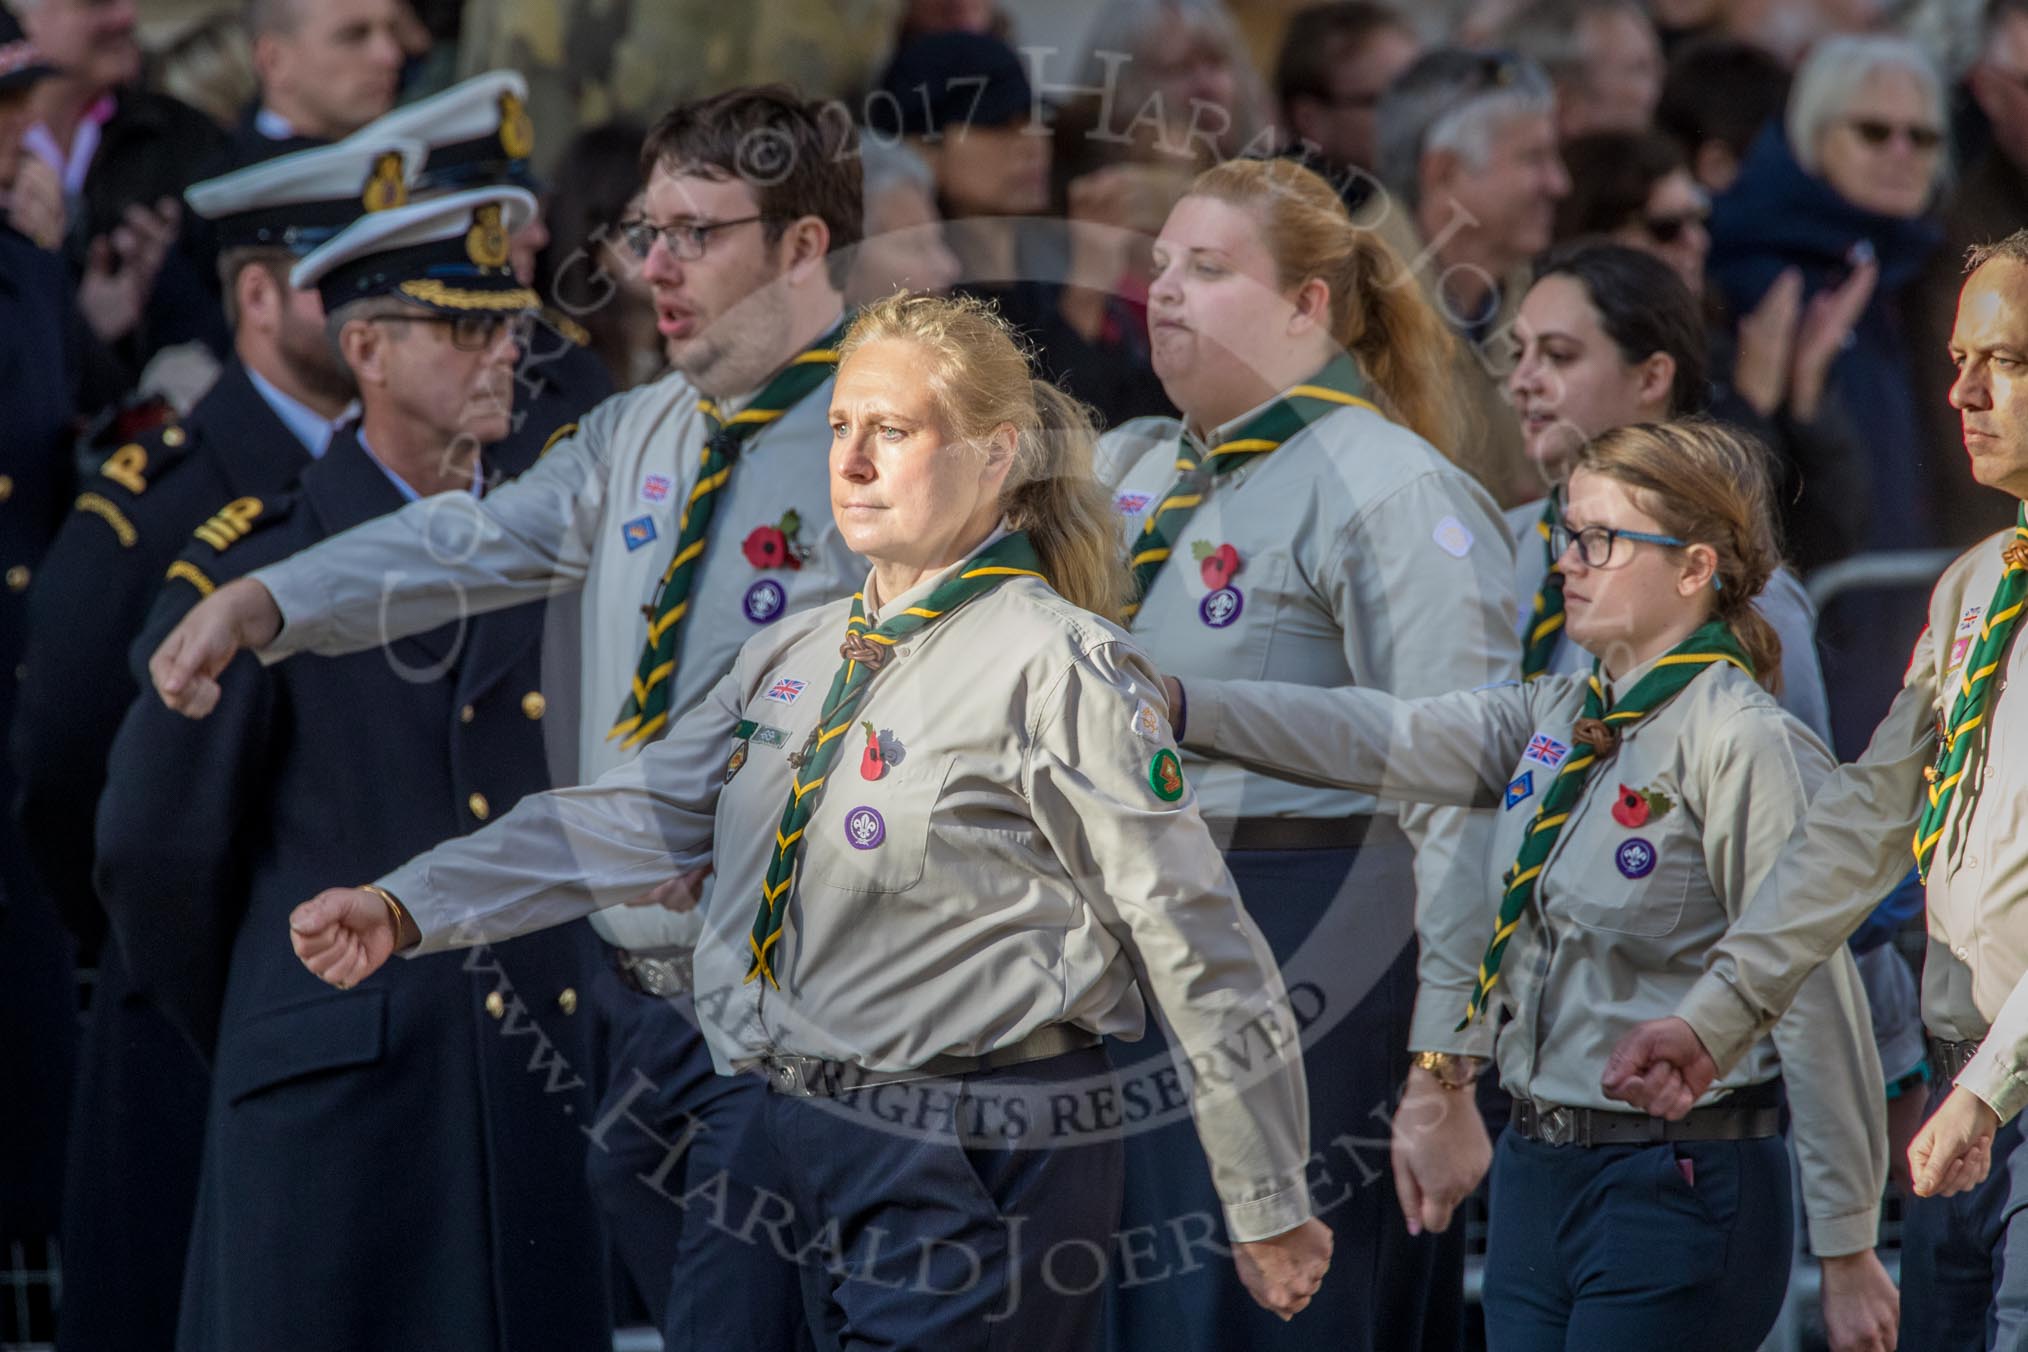 The Scout Association (Group M36, 30 members) during the Royal British Legion March Past on Remembrance Sunday at the Cenotaph, Whitehall, Westminster, London, 11 November 2018, 12:30.